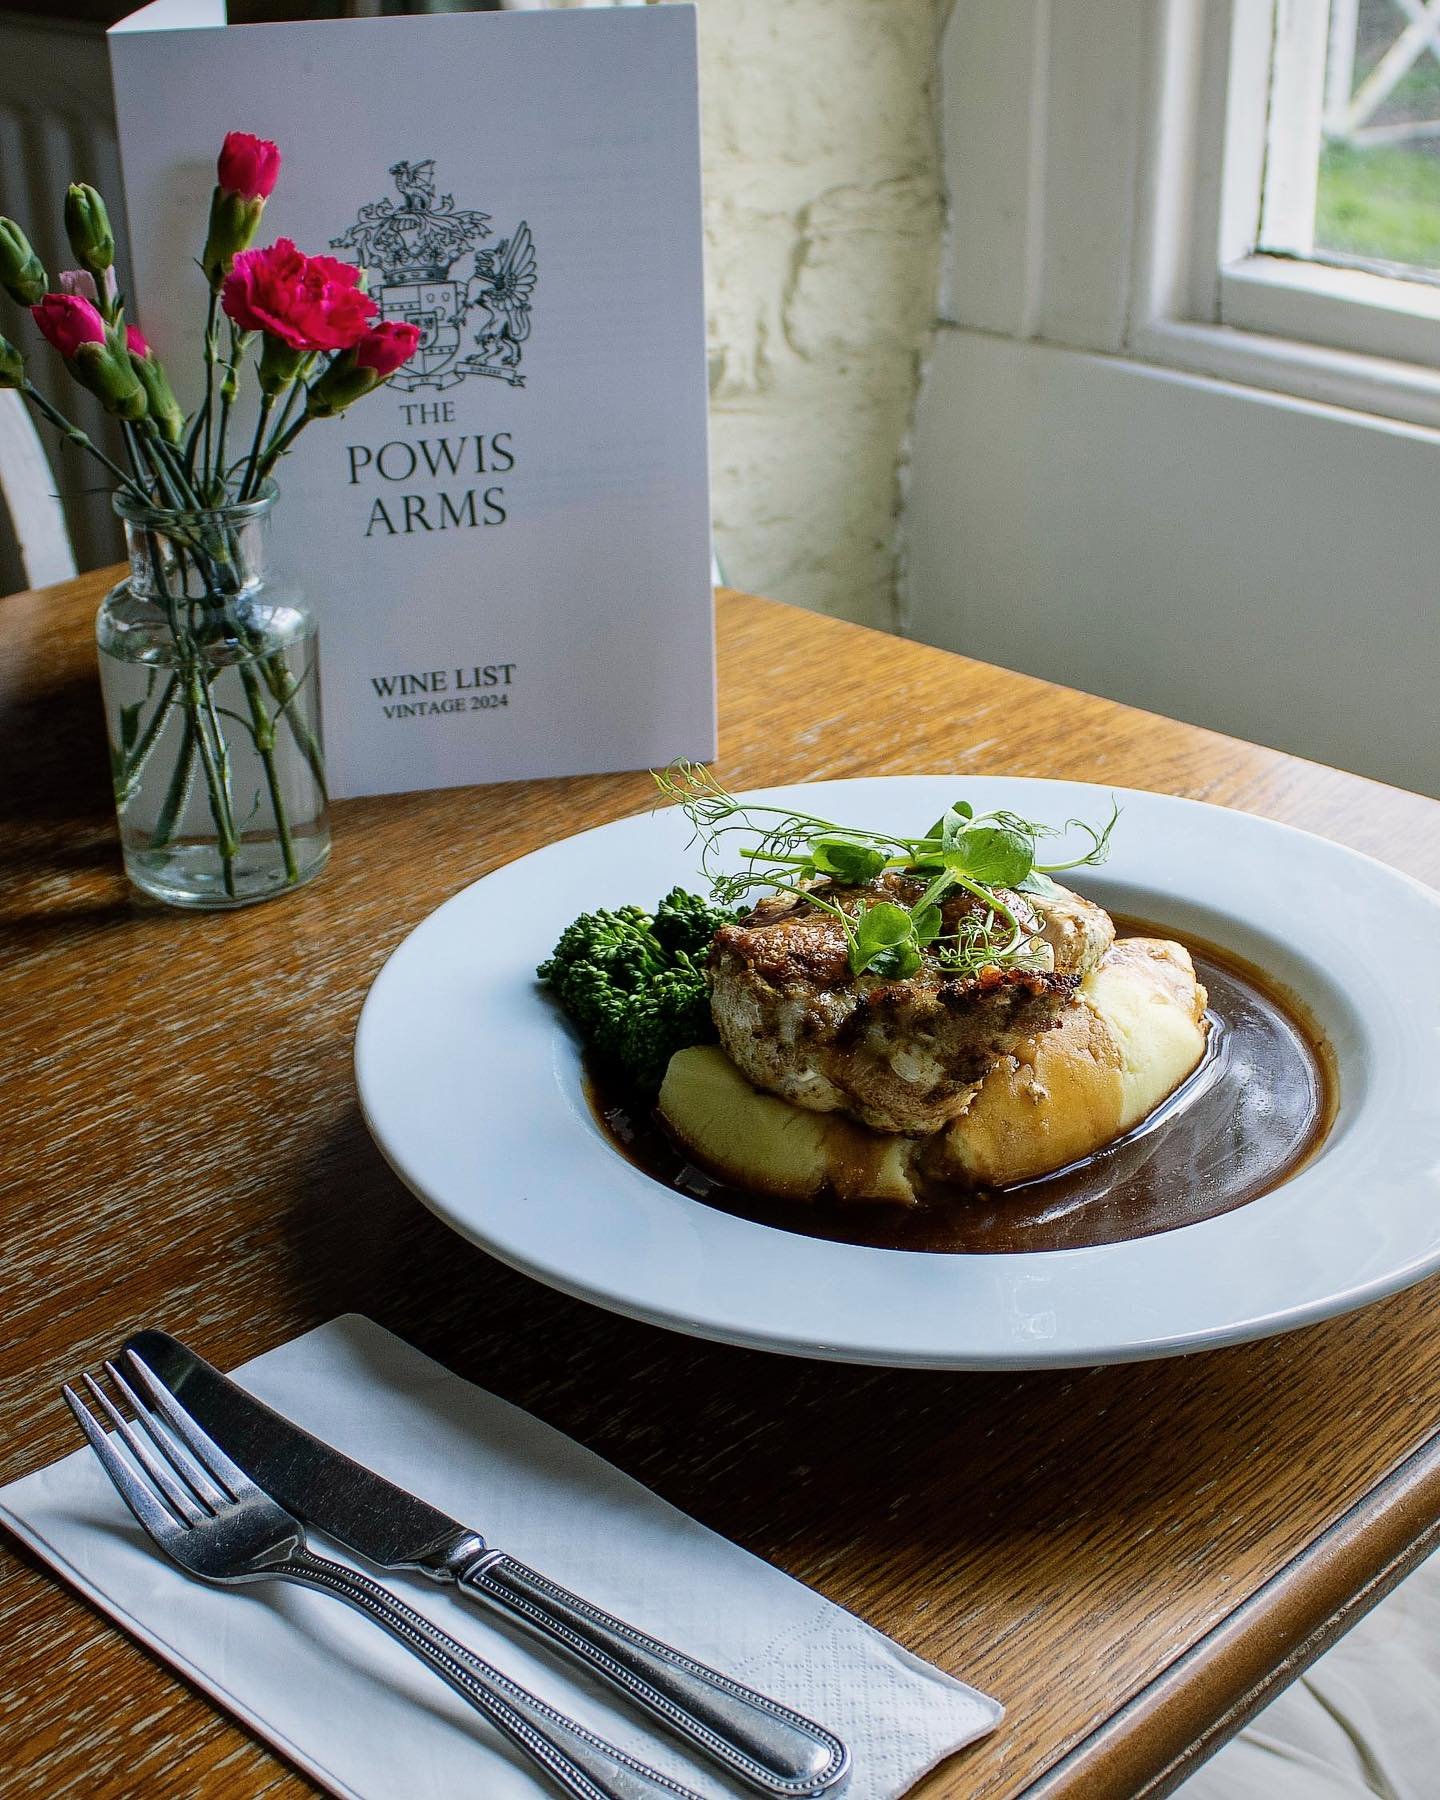 Have you tried any of the dishes on our new menu yet? 

Make sure you visit this week and over the weekend for some delicious food and the welcoming country pub atmosphere you&rsquo;ll get at the @powisarms 🍽️

#pubfood #shropshirefoodies #shropshir